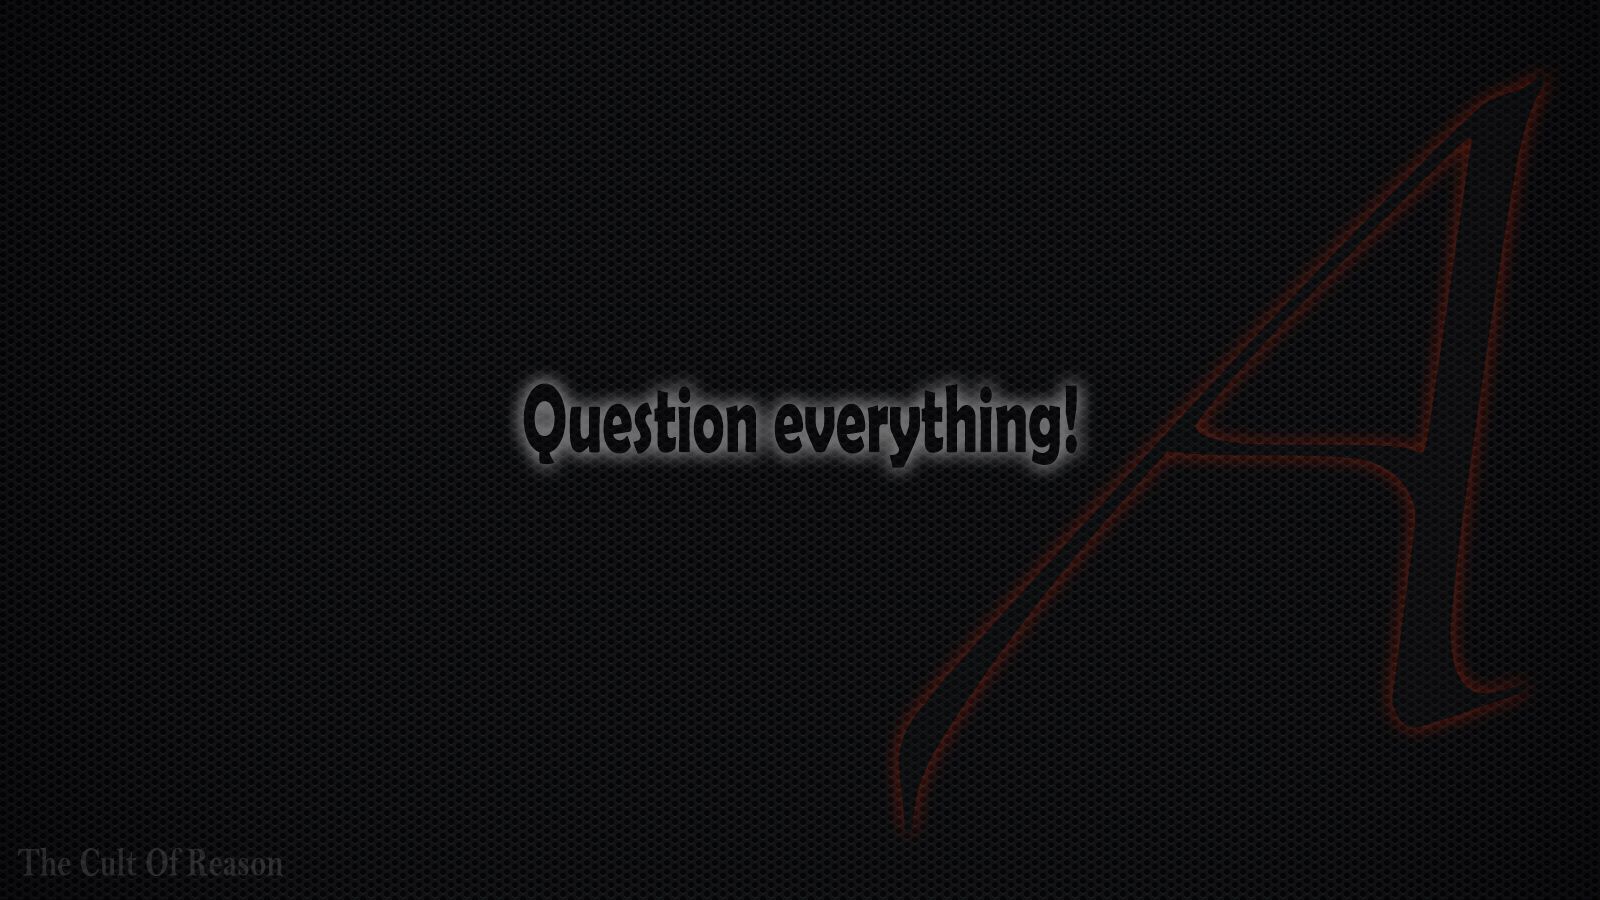 Free Atheism wallpaper: Question Everything!. This or that questions, Question everything, Everything